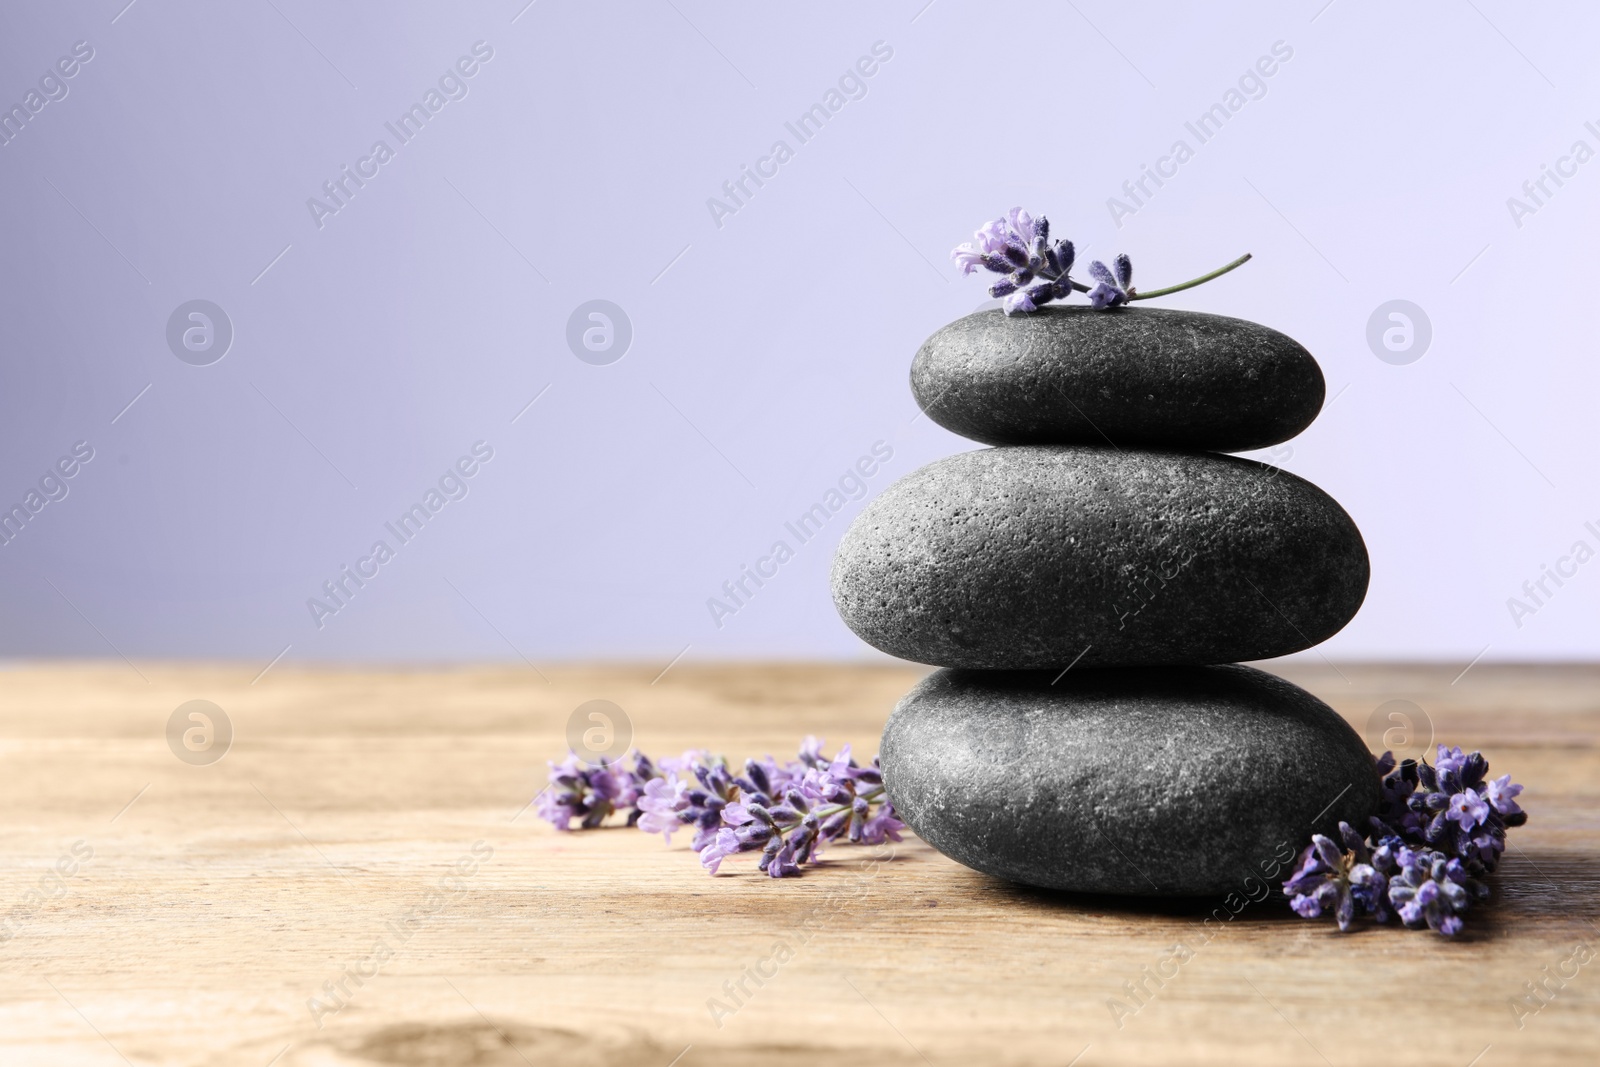 Photo of Spa stones and lavender flowers on wooden table against grey background, space for text.